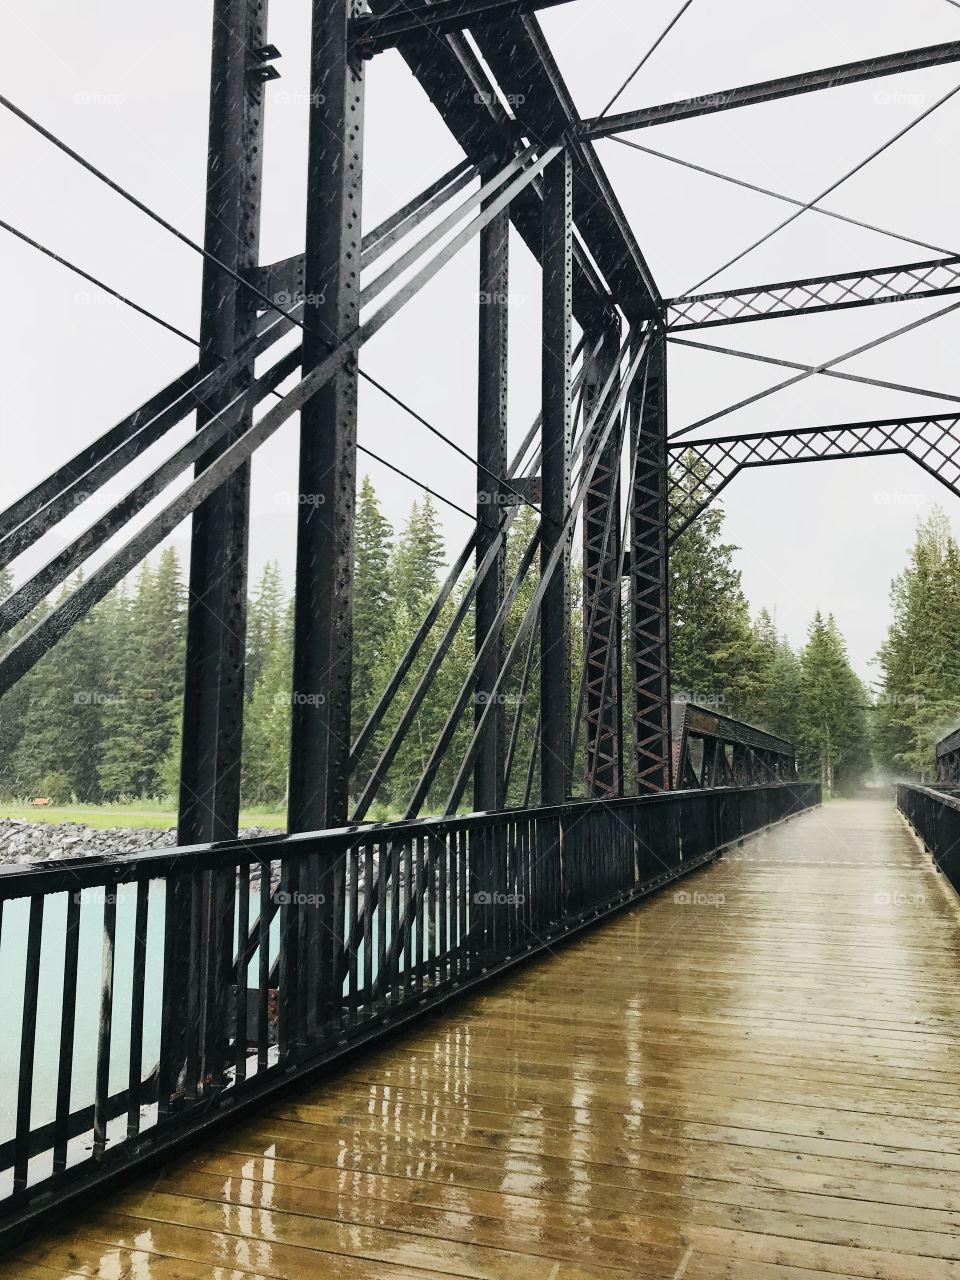 A steel and wood bridge located in Canmore, Alberta, Canada.  It was a rainy day.  Water is flowing under the bridge.